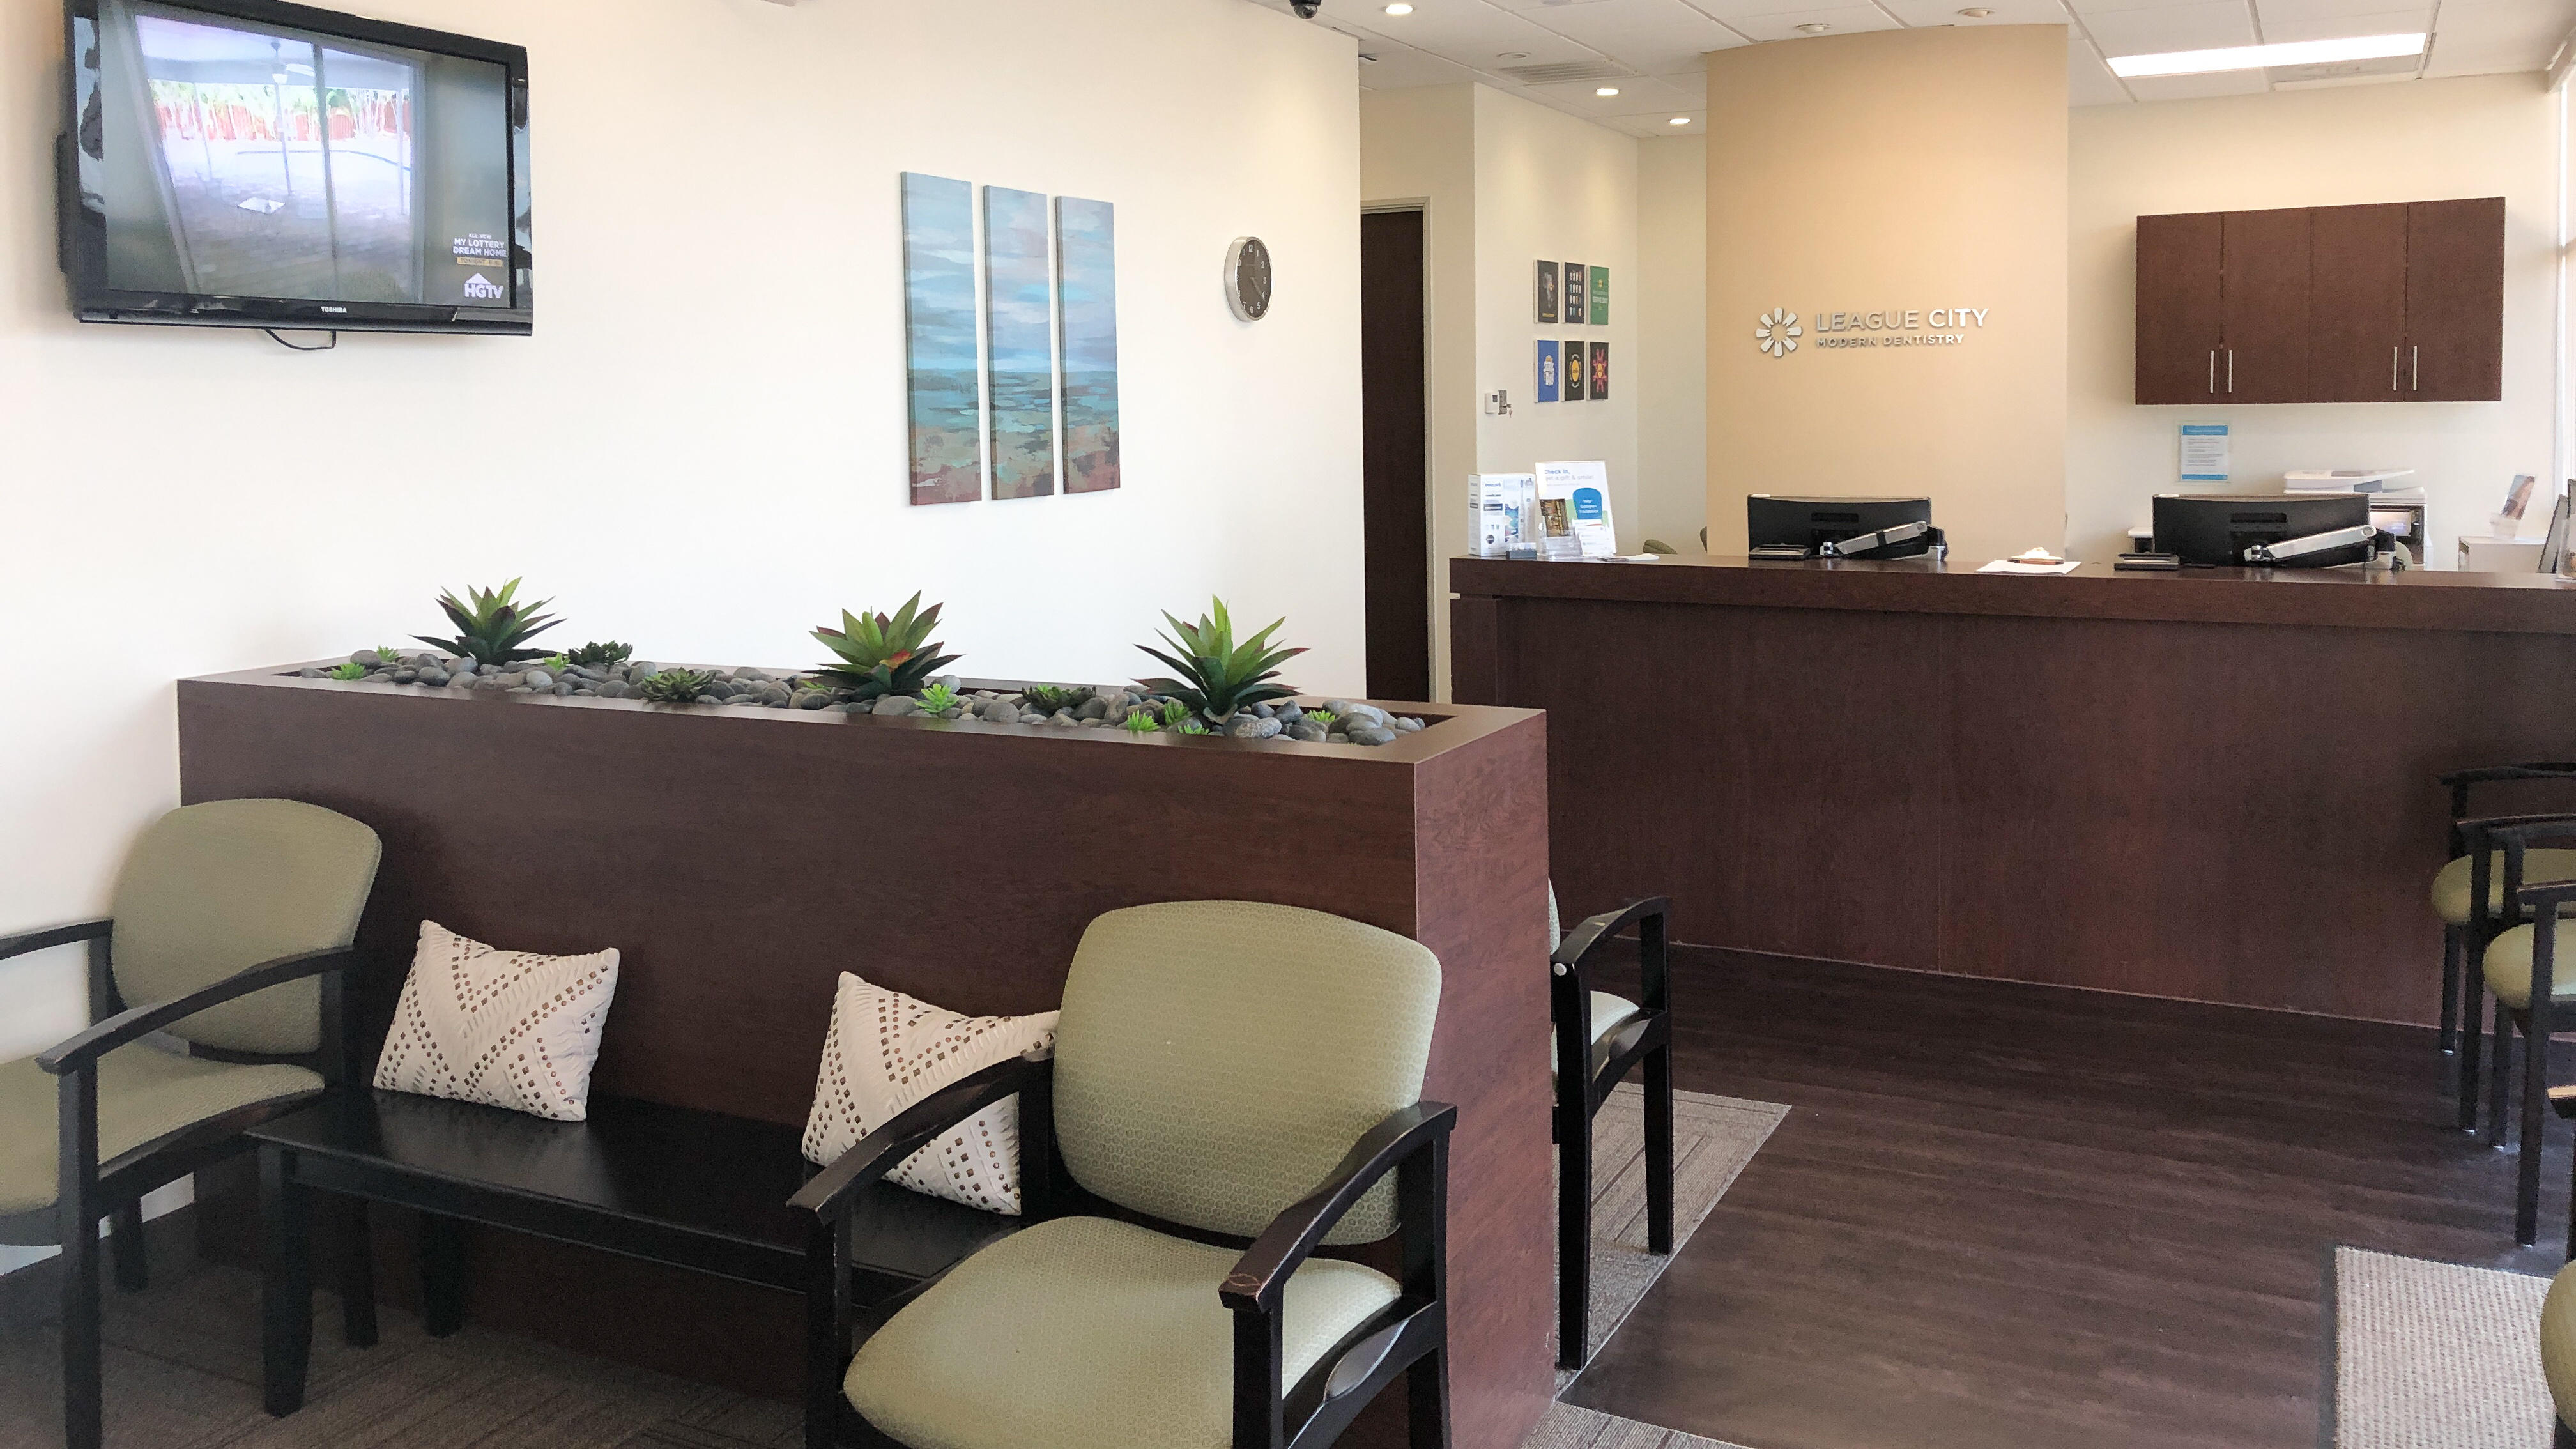 League City Modern Dentistry and Orthodontics opened its doors to the Dickinson community in October 2012!